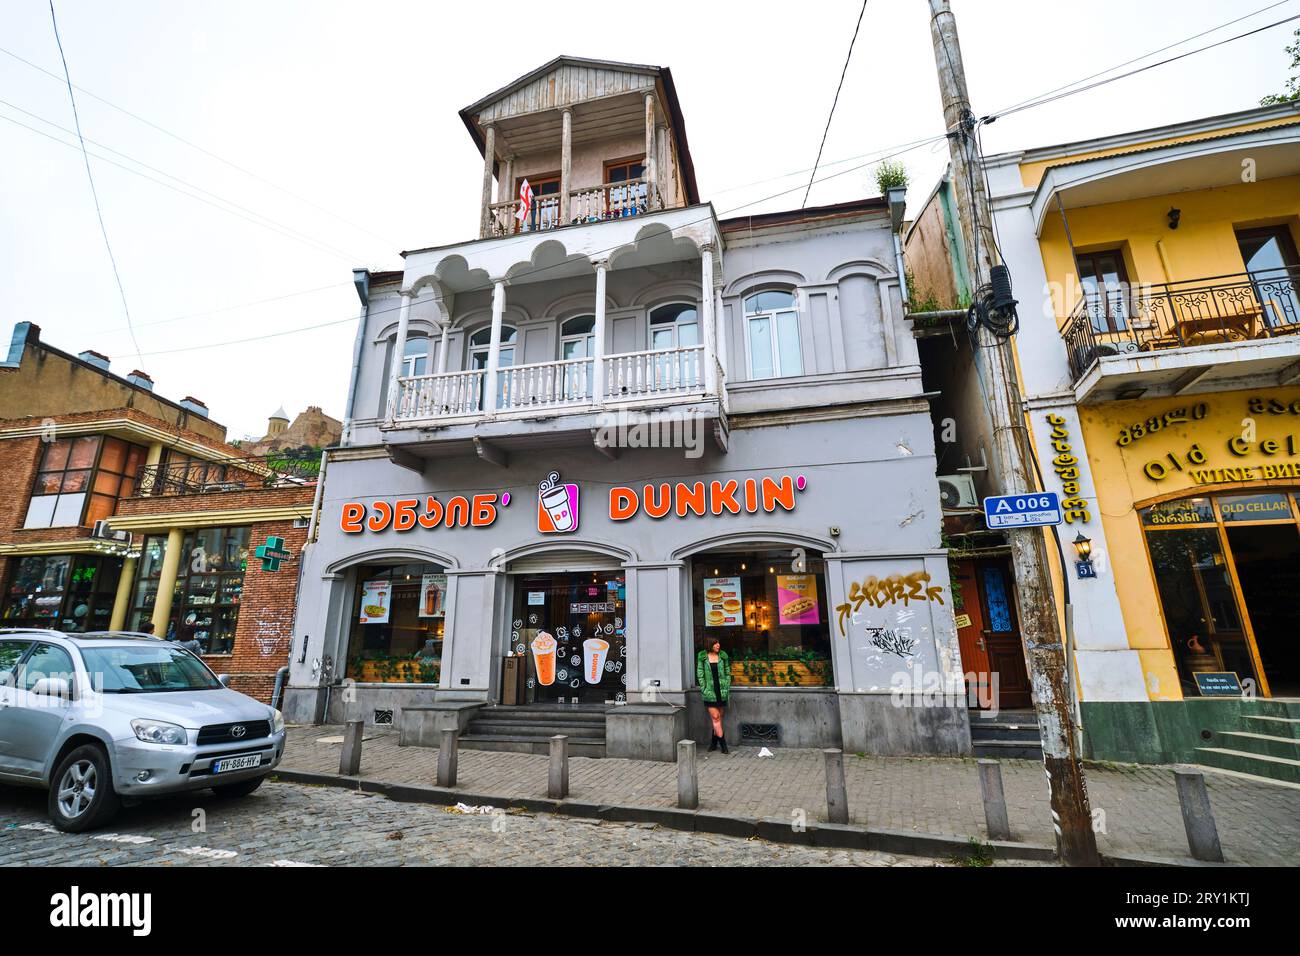 The sign for Dunkin' Donuts, the American fast food franchise. The sign is in both English and Georgian languages. In Tbilisi, Georgia, Europe. Stock Photo